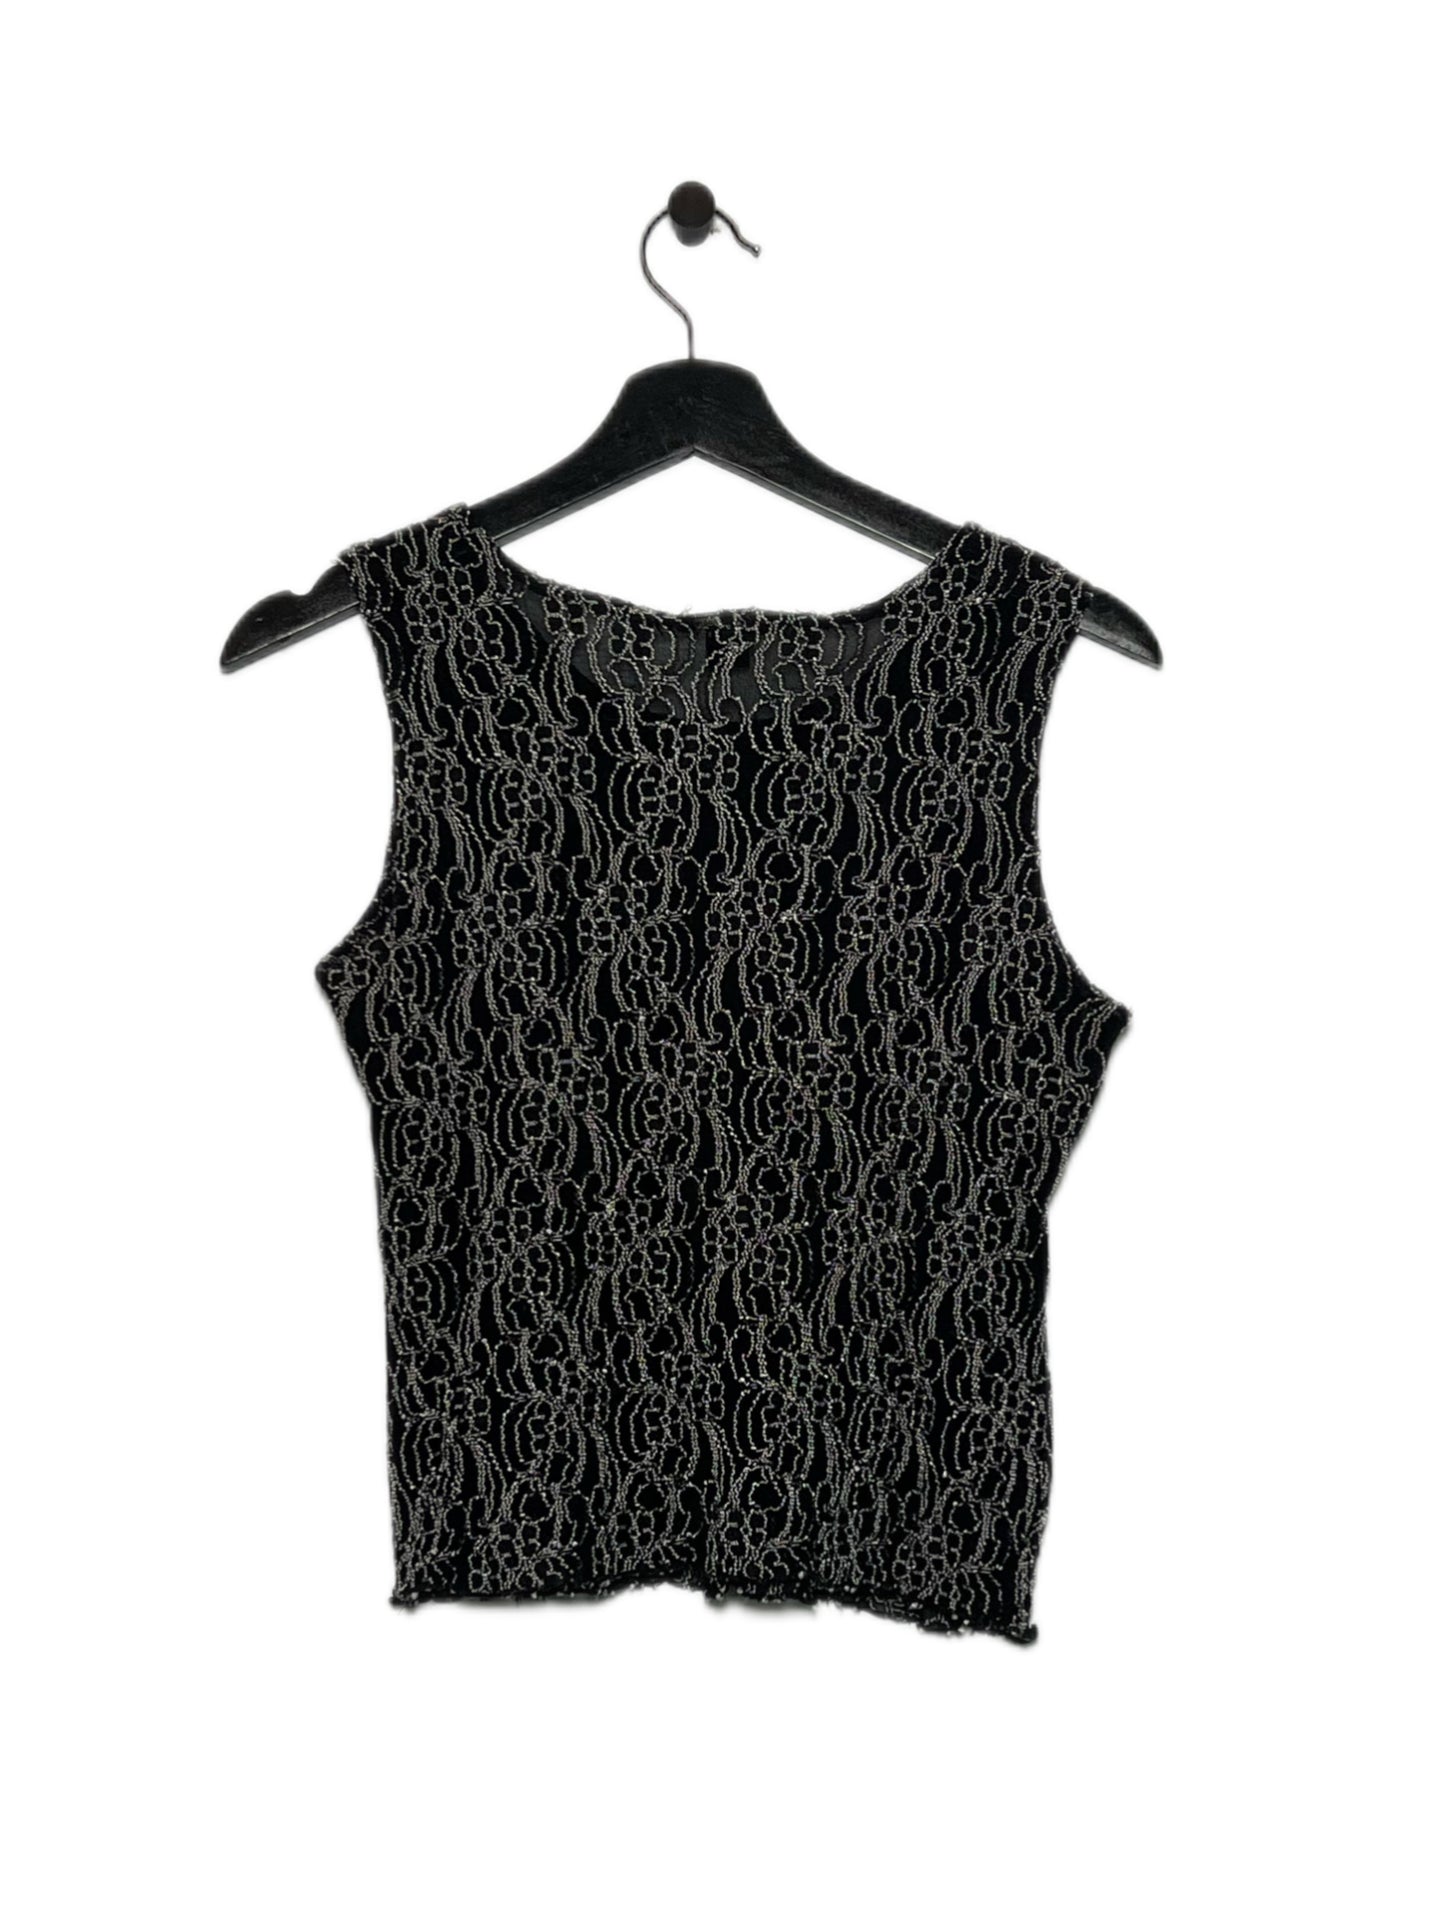 Y2K Black and White Embroidered Top